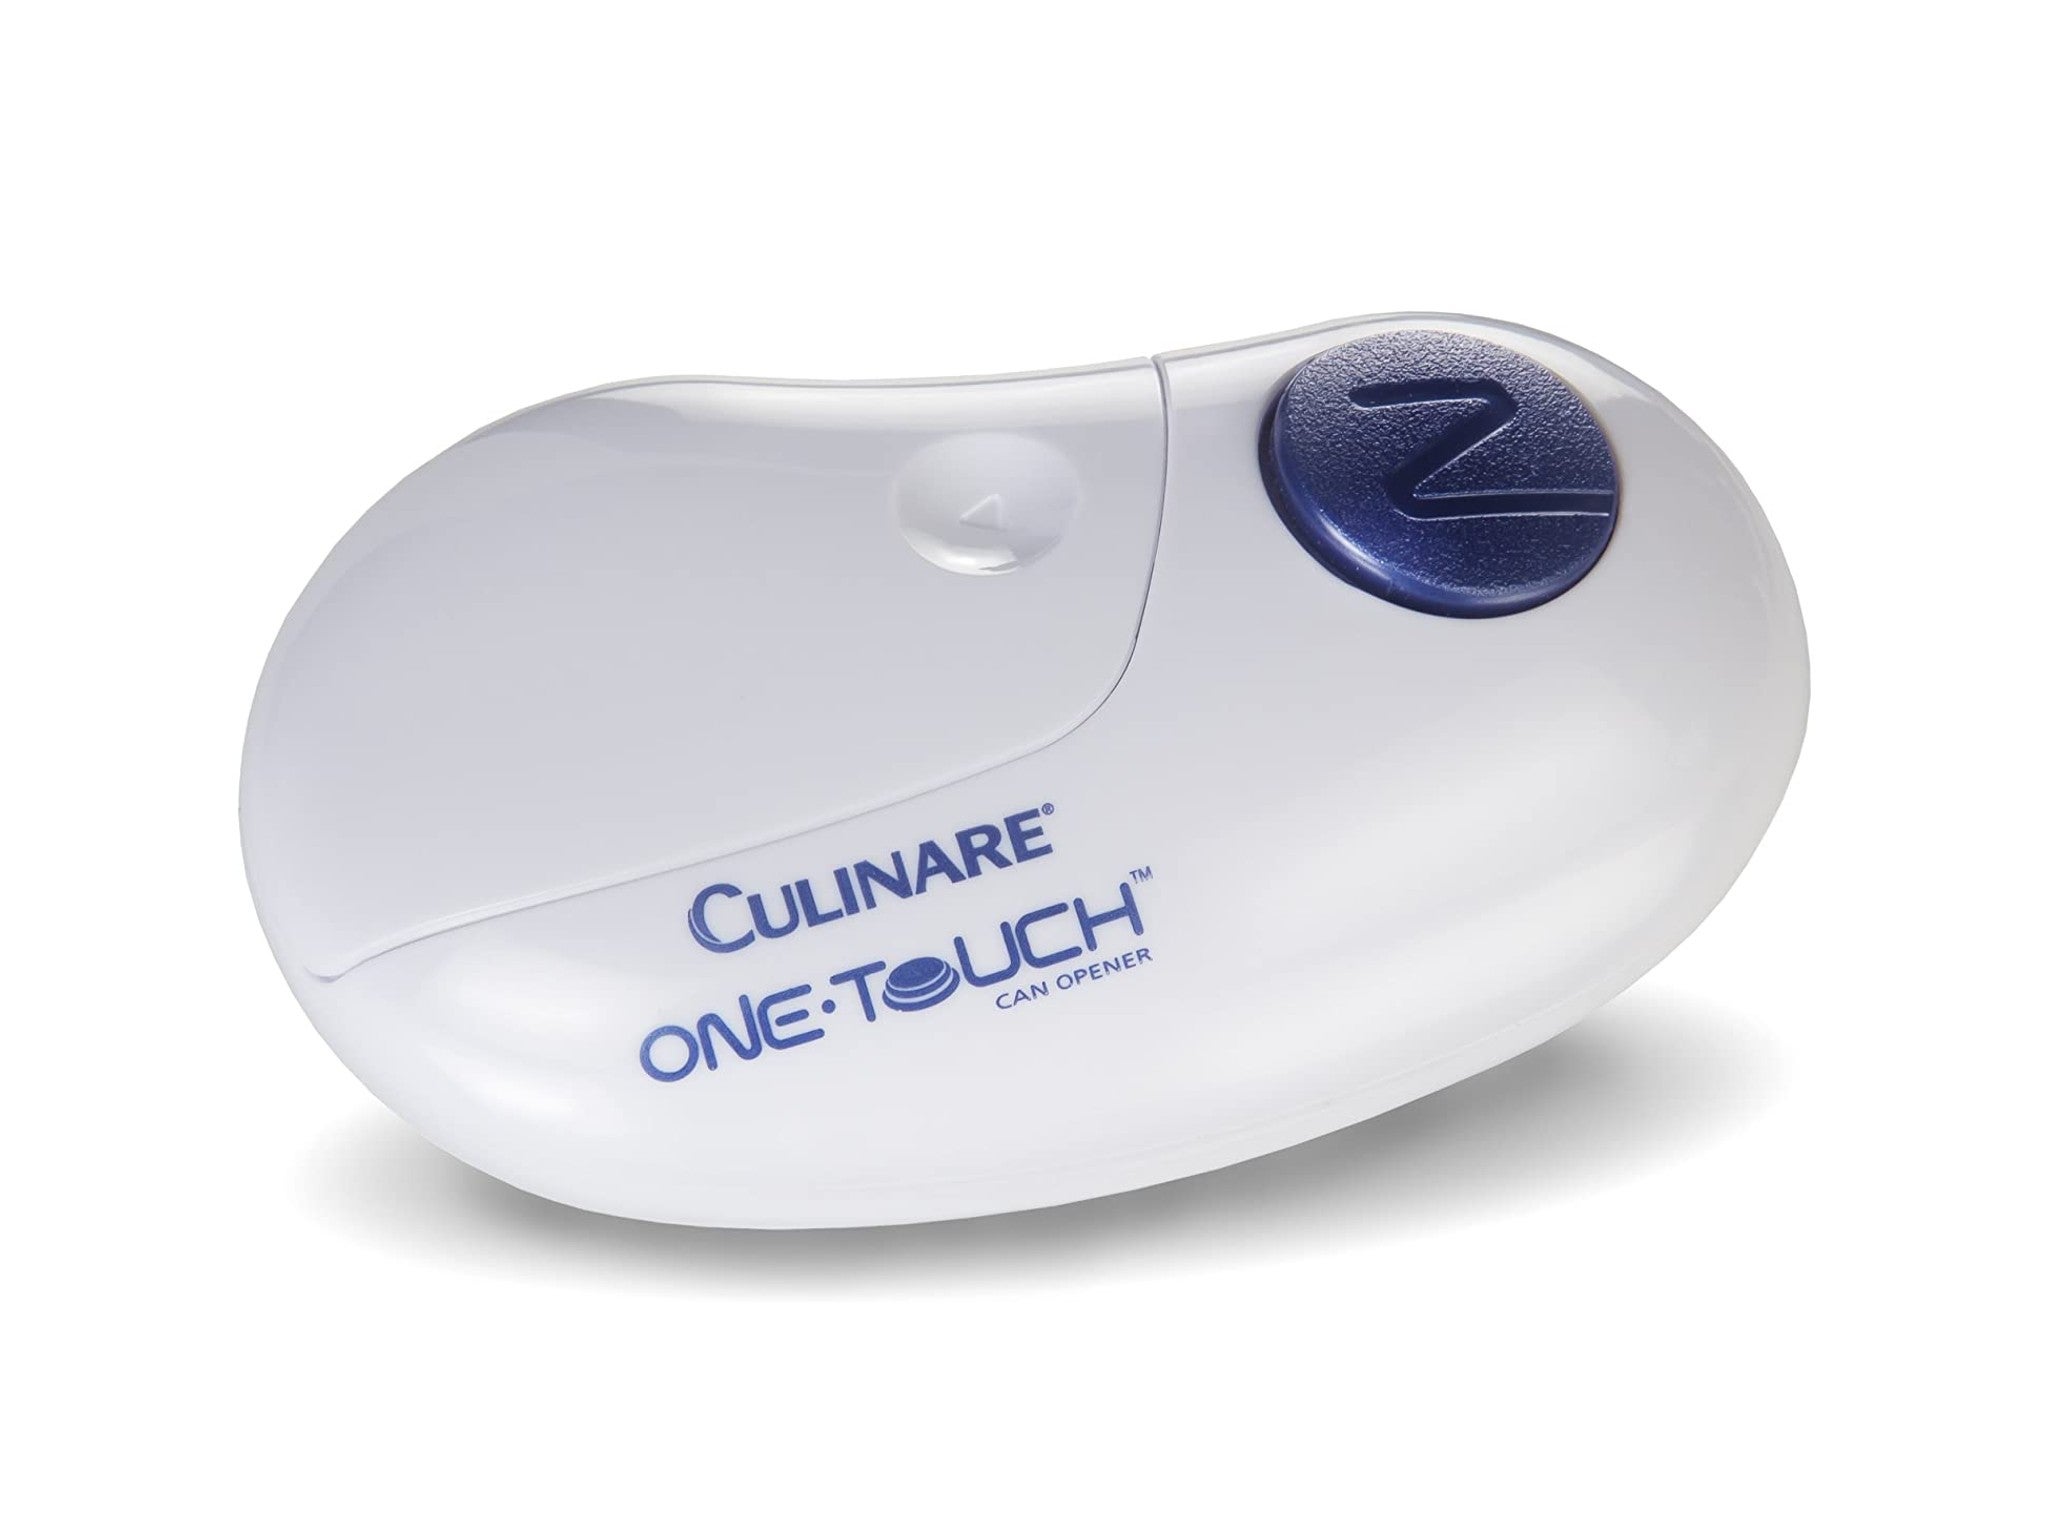 Culinare advanced one-touch can opener indybest.jpg